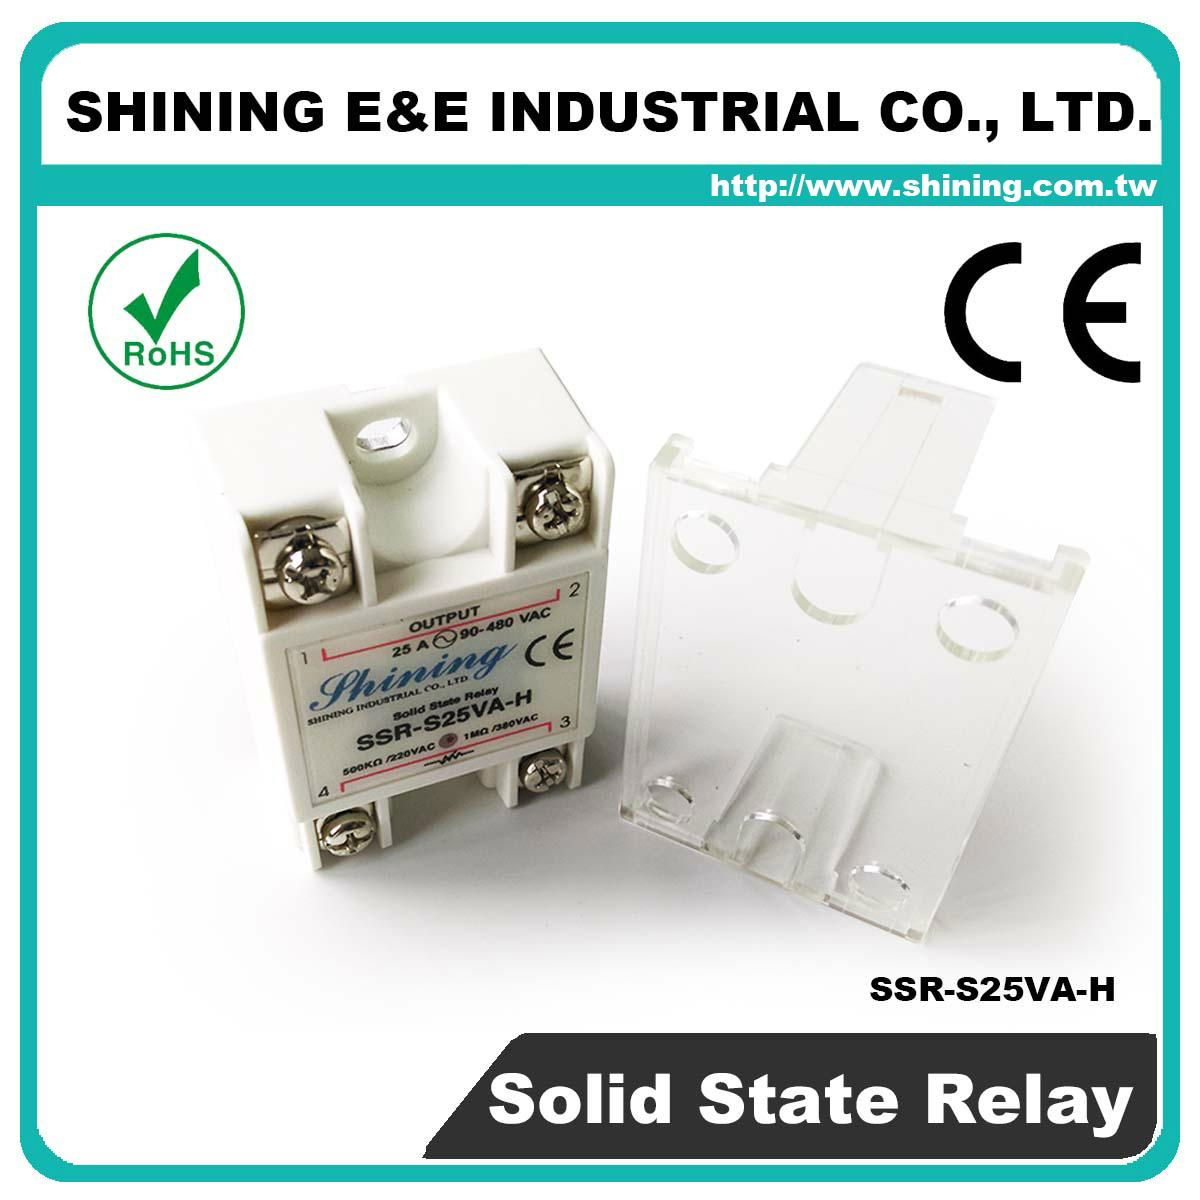 SSR-S25VA-H VR to AC Phase Control Adjustable Solid State Relays 2